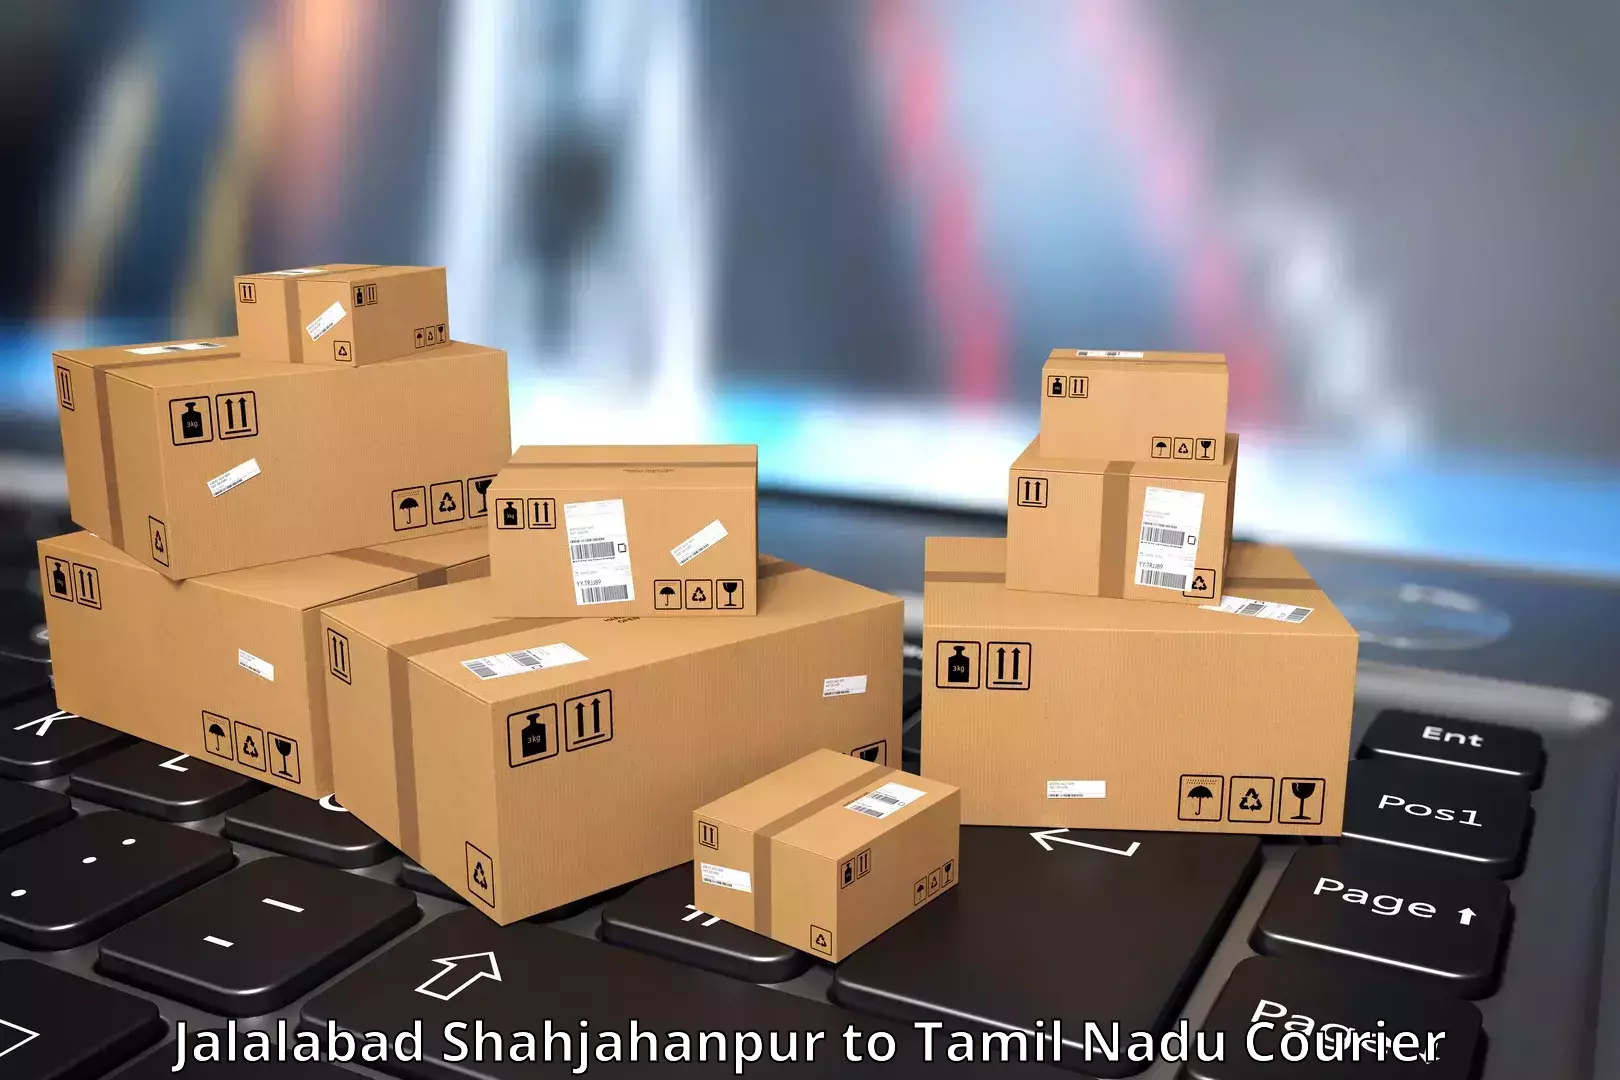 24/7 courier service Jalalabad Shahjahanpur to Sri Ramachandra Institute of Higher Education and Research Chennai